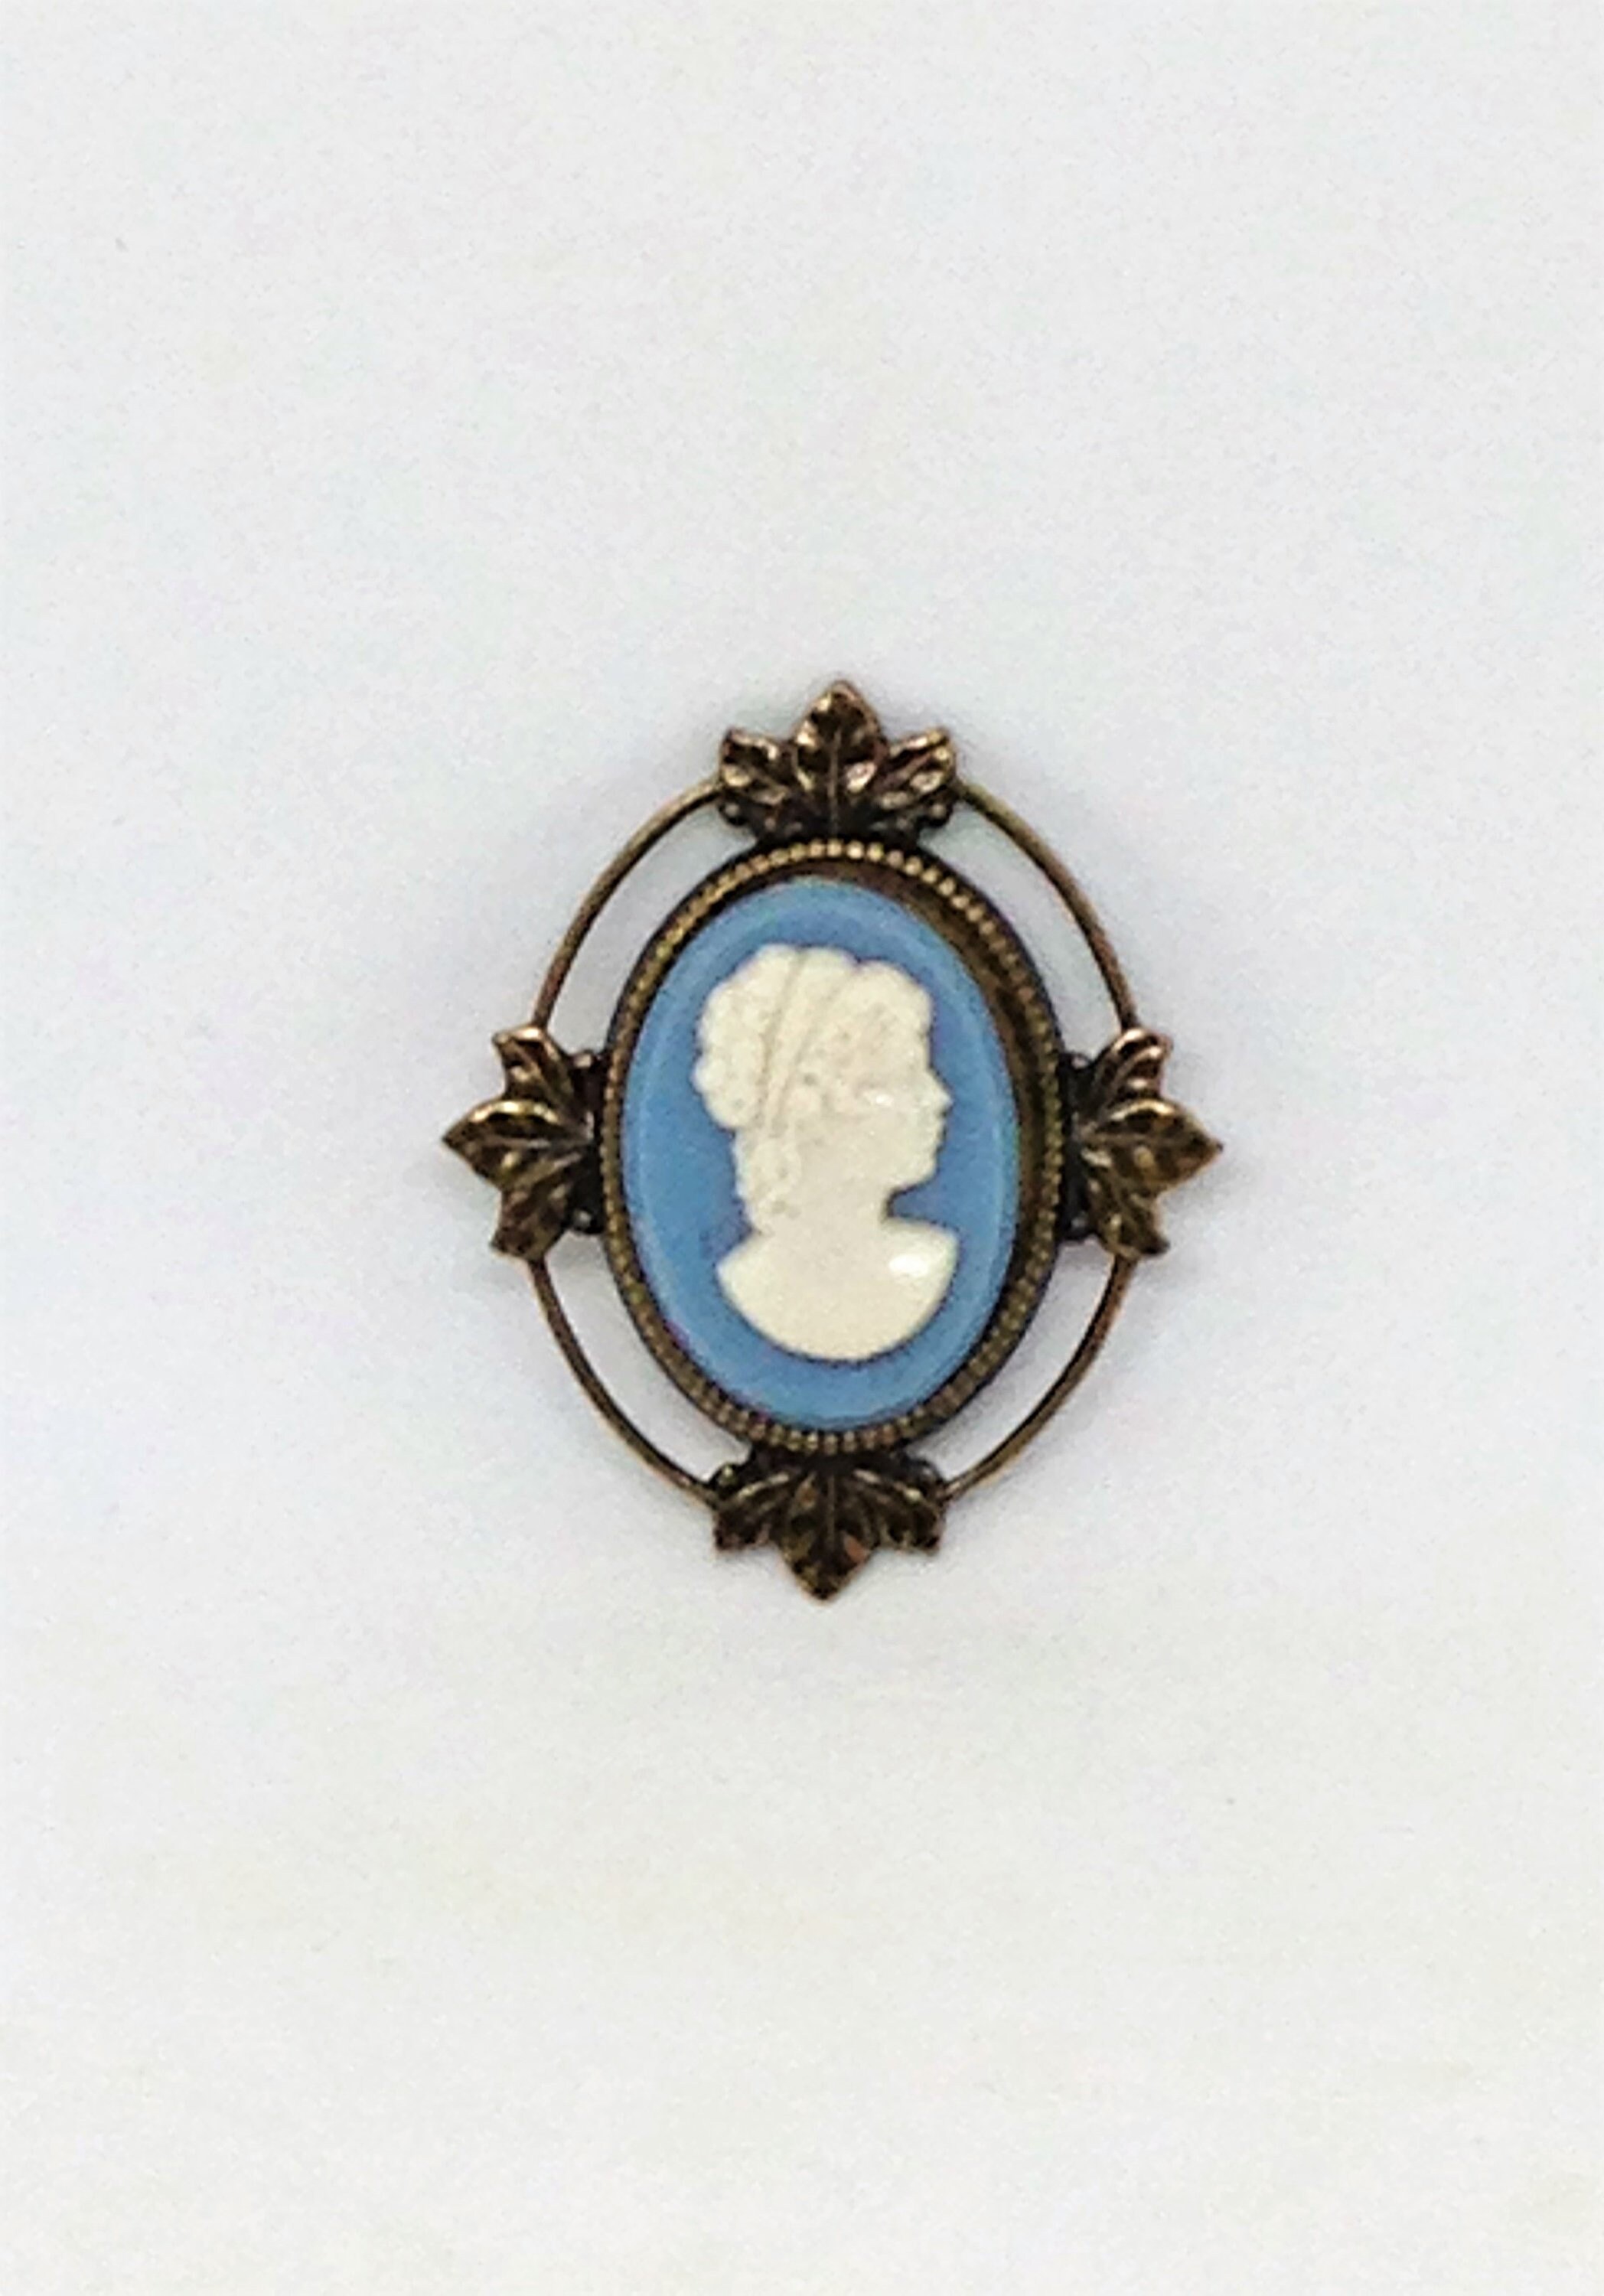 Vintage Cameo Brooch Blue and White Cameo Victorian Lady | Etsy